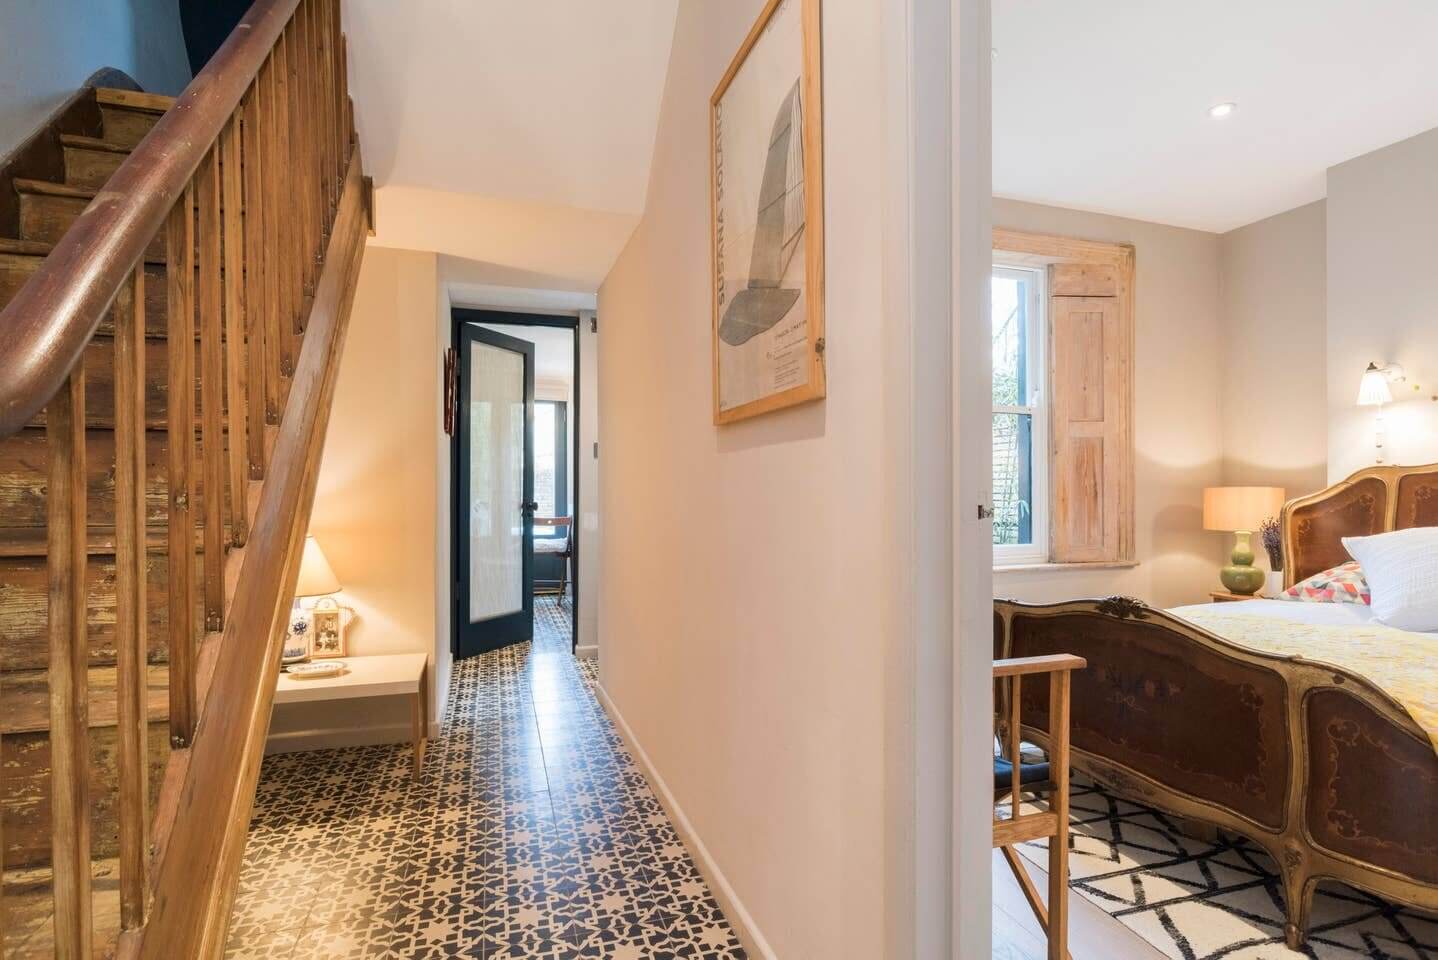 london airbnb nordroom7 A Combination of Styles in Stunning London Airbnb